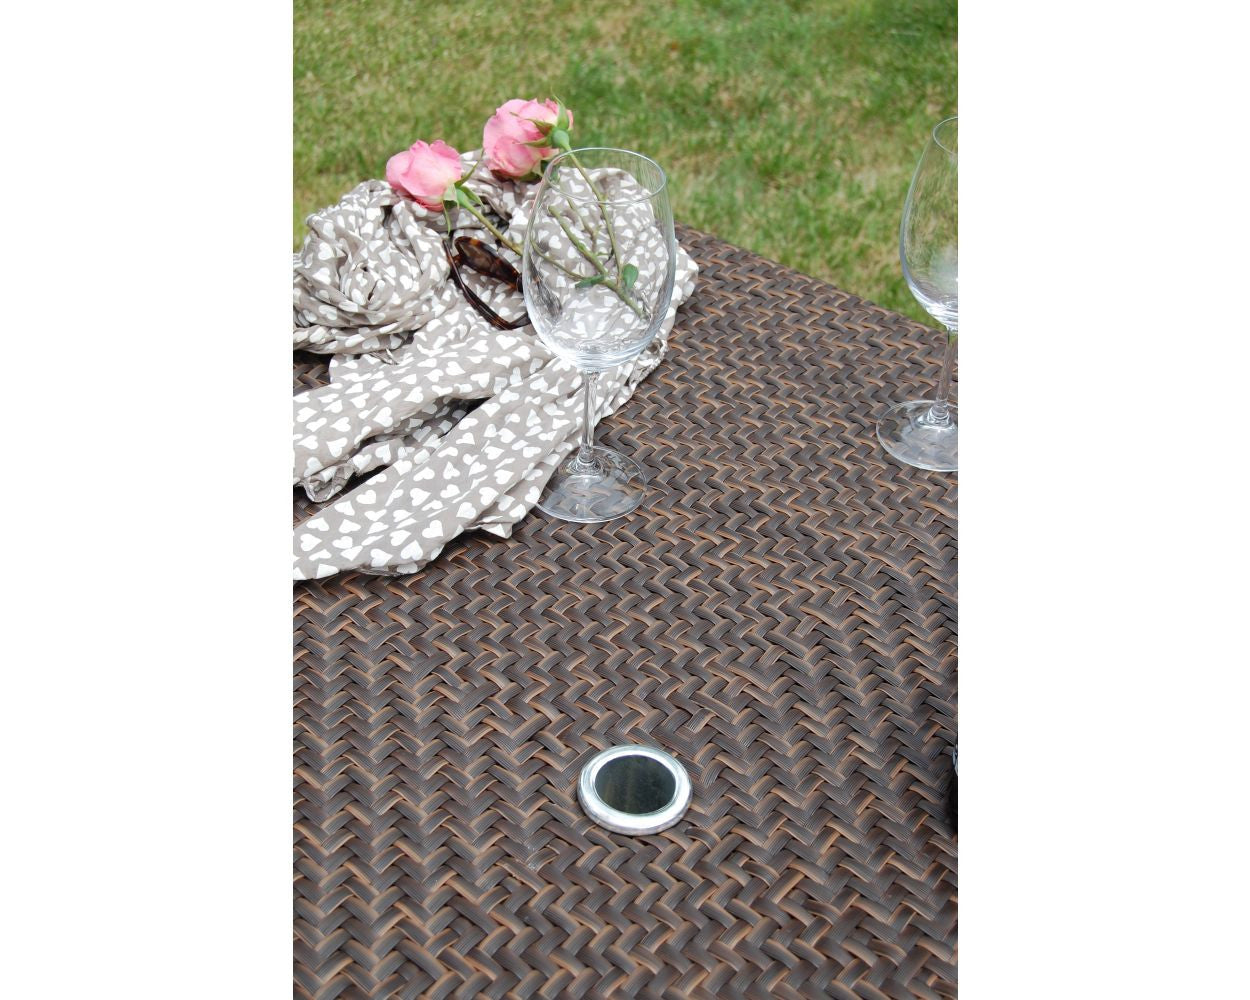 Hospitality Rattan Soho Woven Square 40" Dining Table with Glass